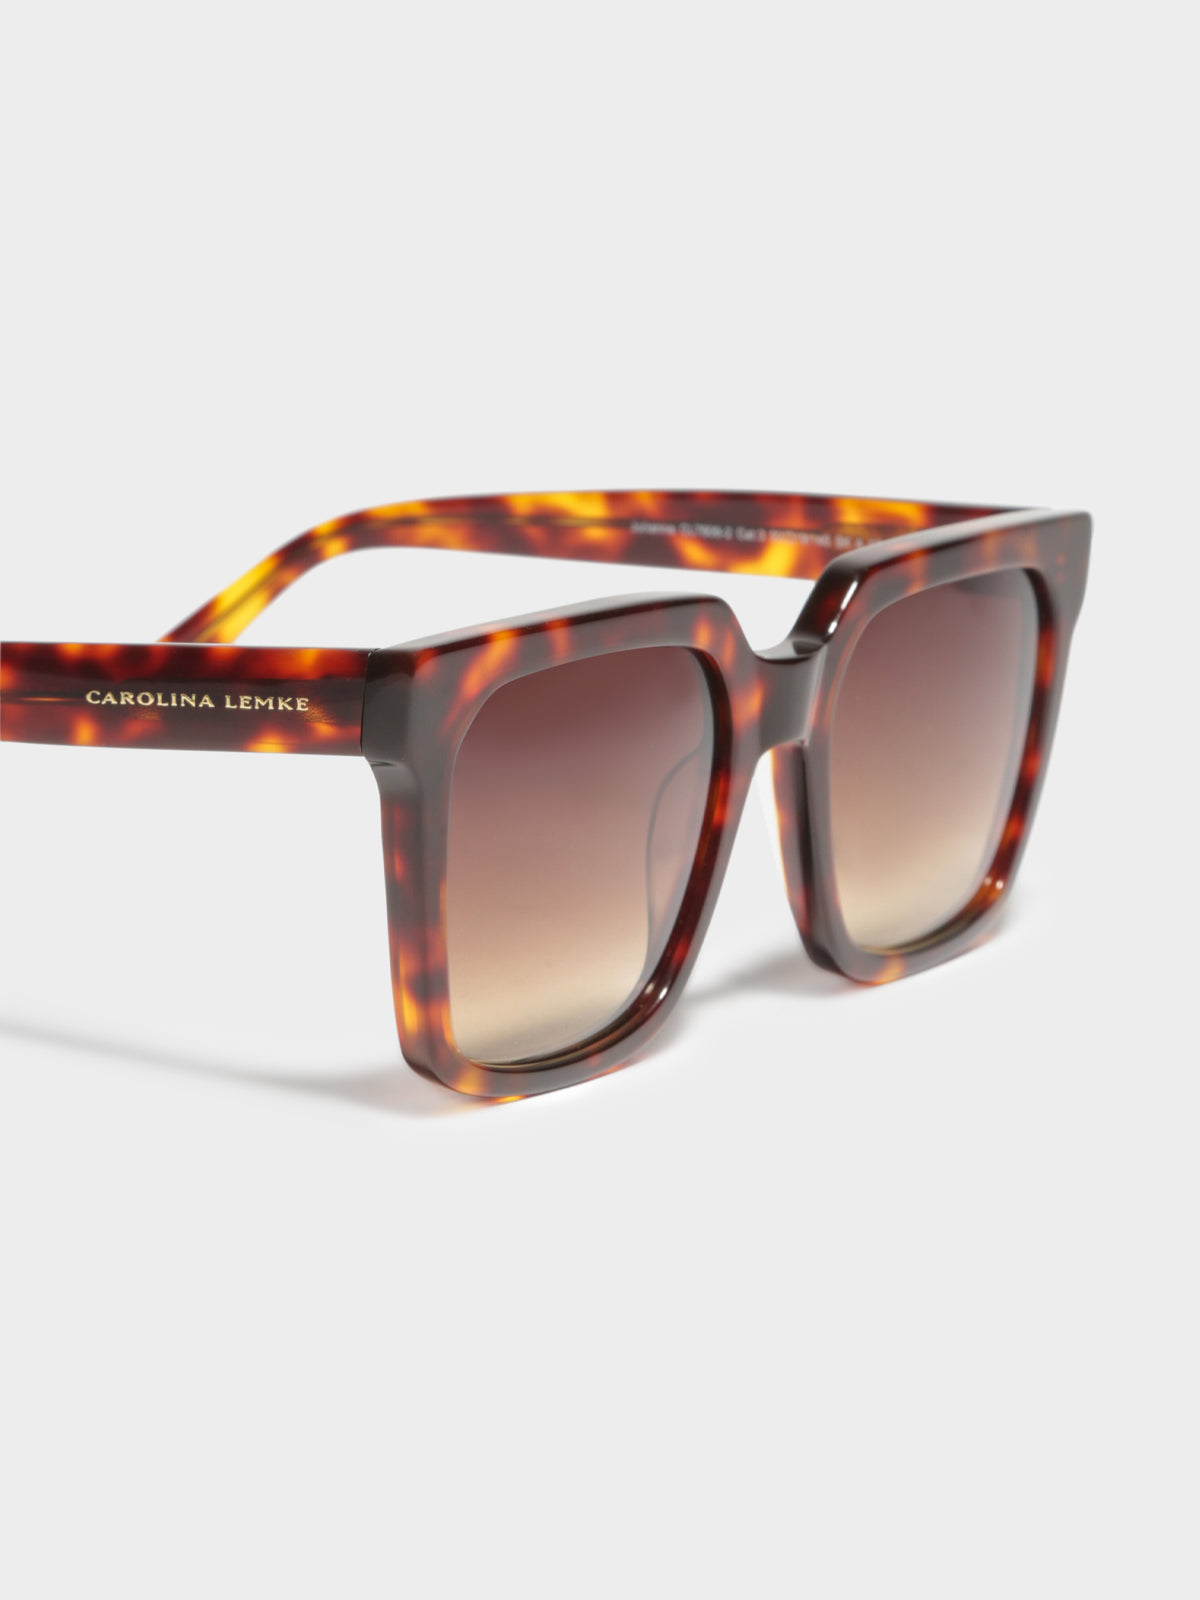 CL7806 Sunglasses in Brown Tortoise Shell